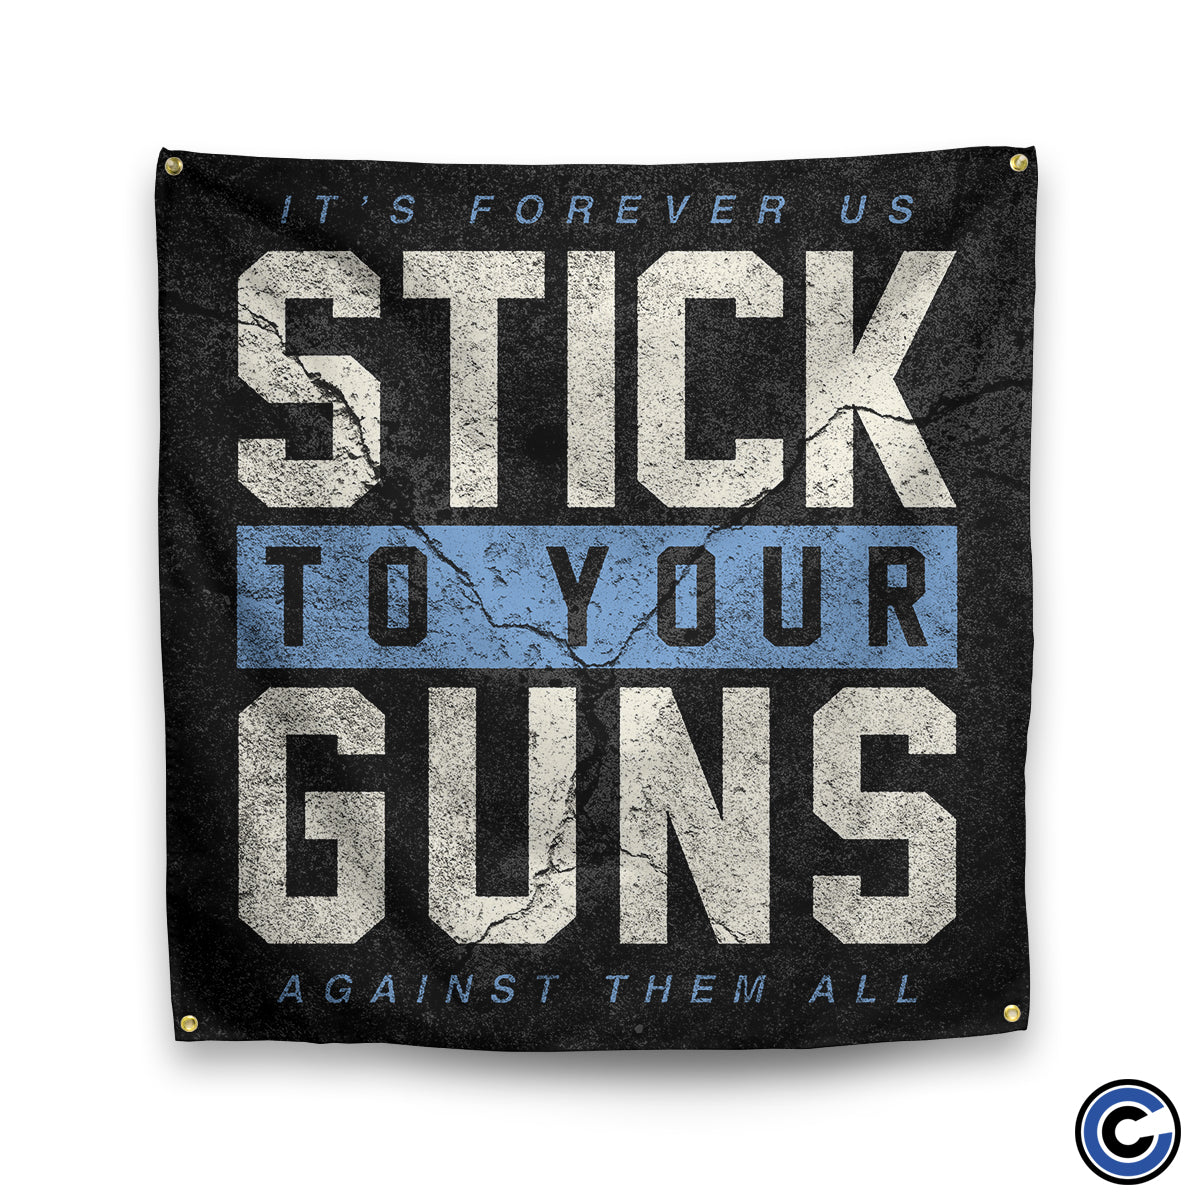 Stick To Your Guns "Against Them All" Flag